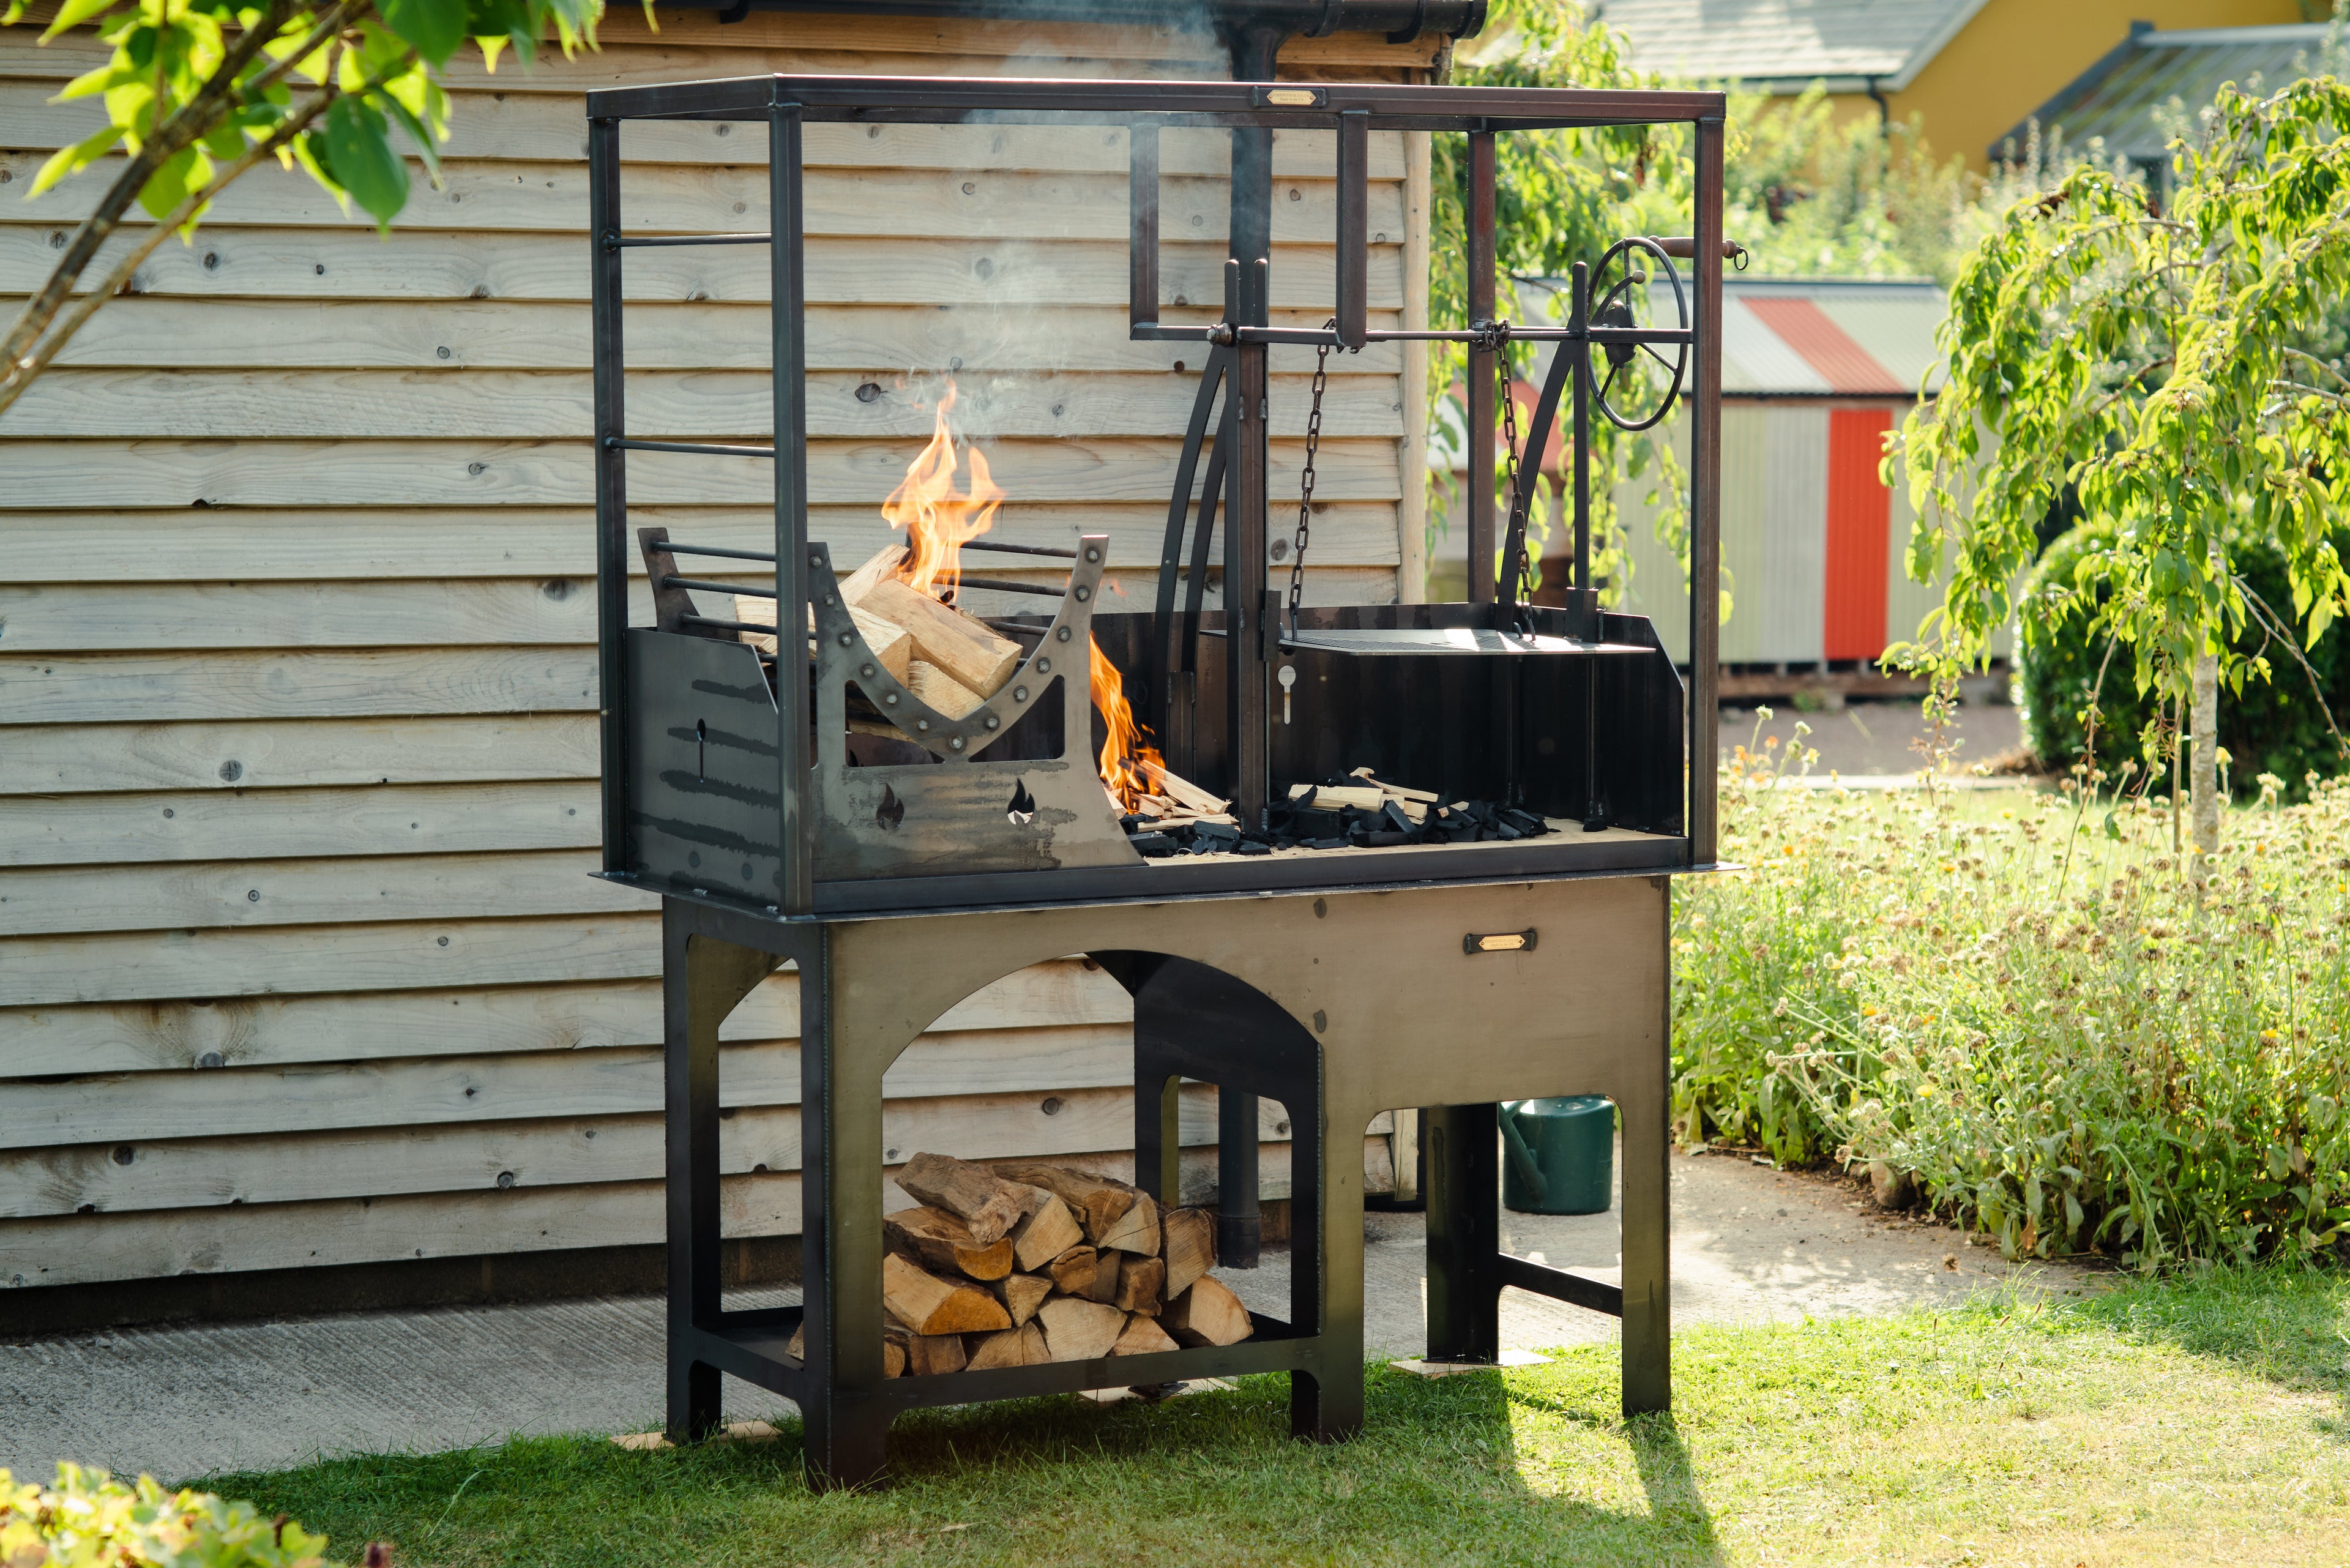 Outdoor Cooking Kitchen Collection BBQs Grills Ovens